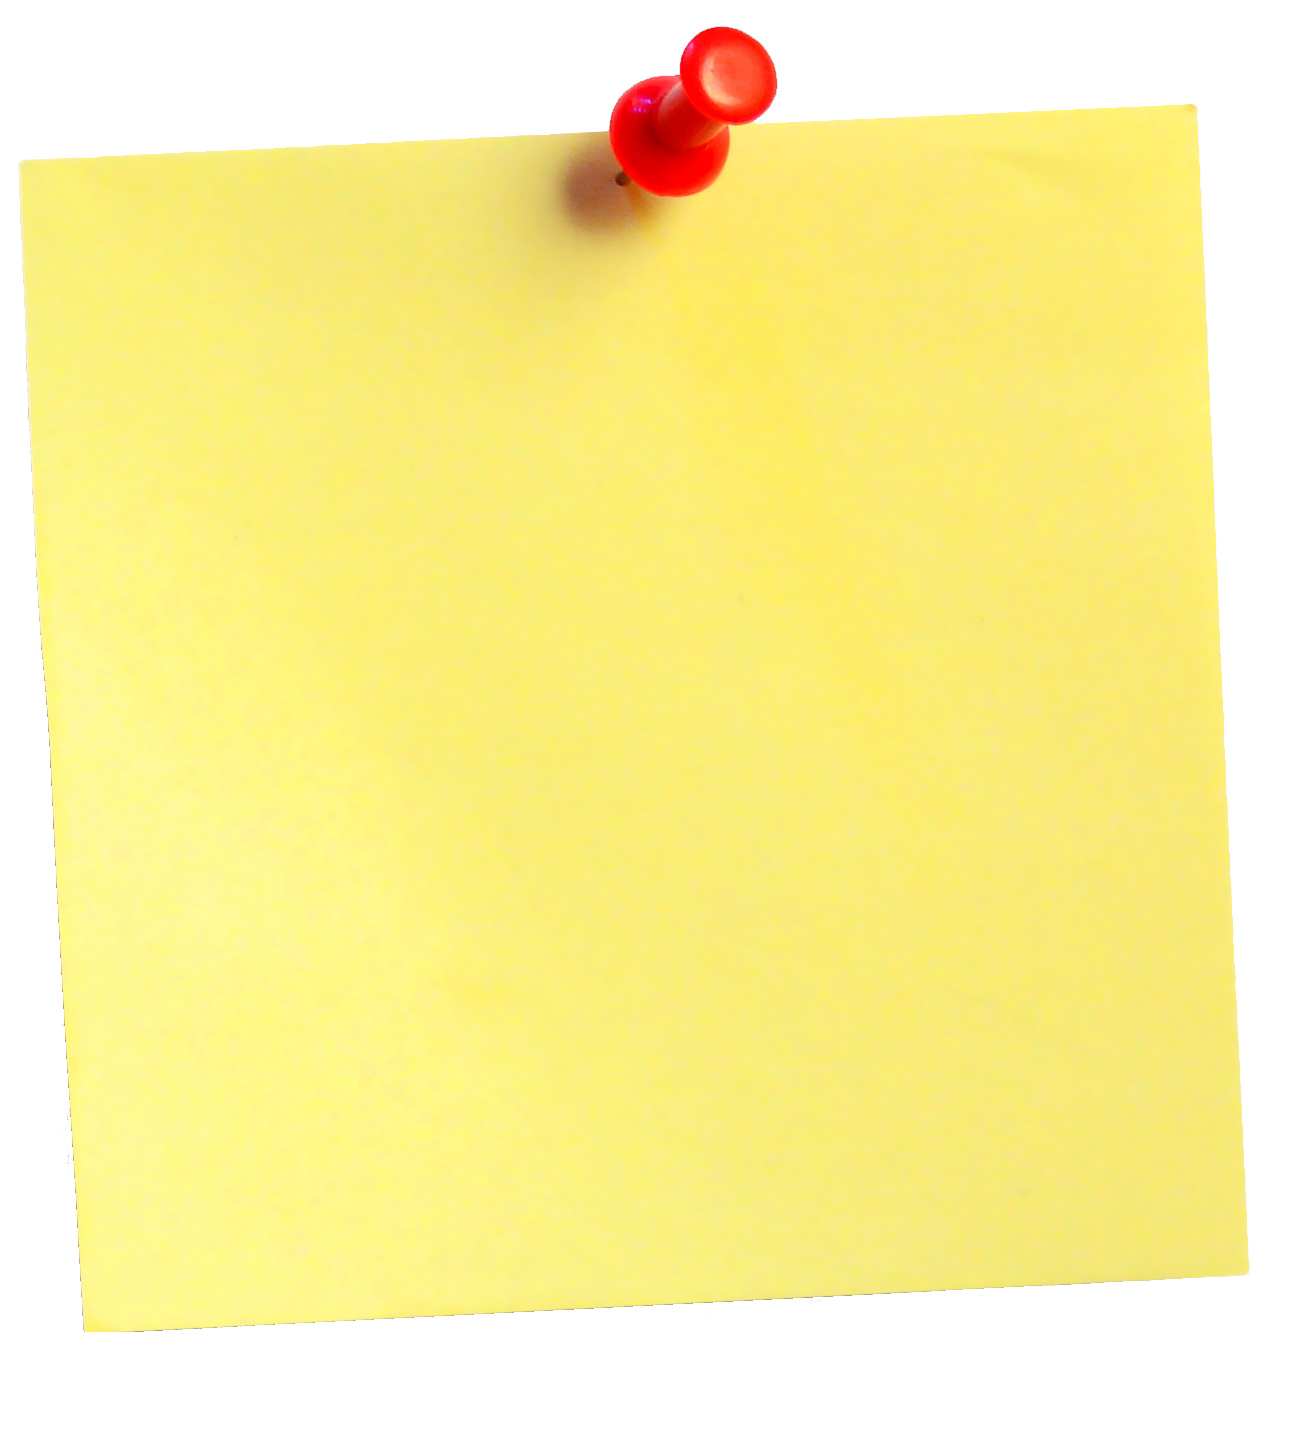 Post It Note Paper Link Free Sticky Notes Clip Art Post It Png